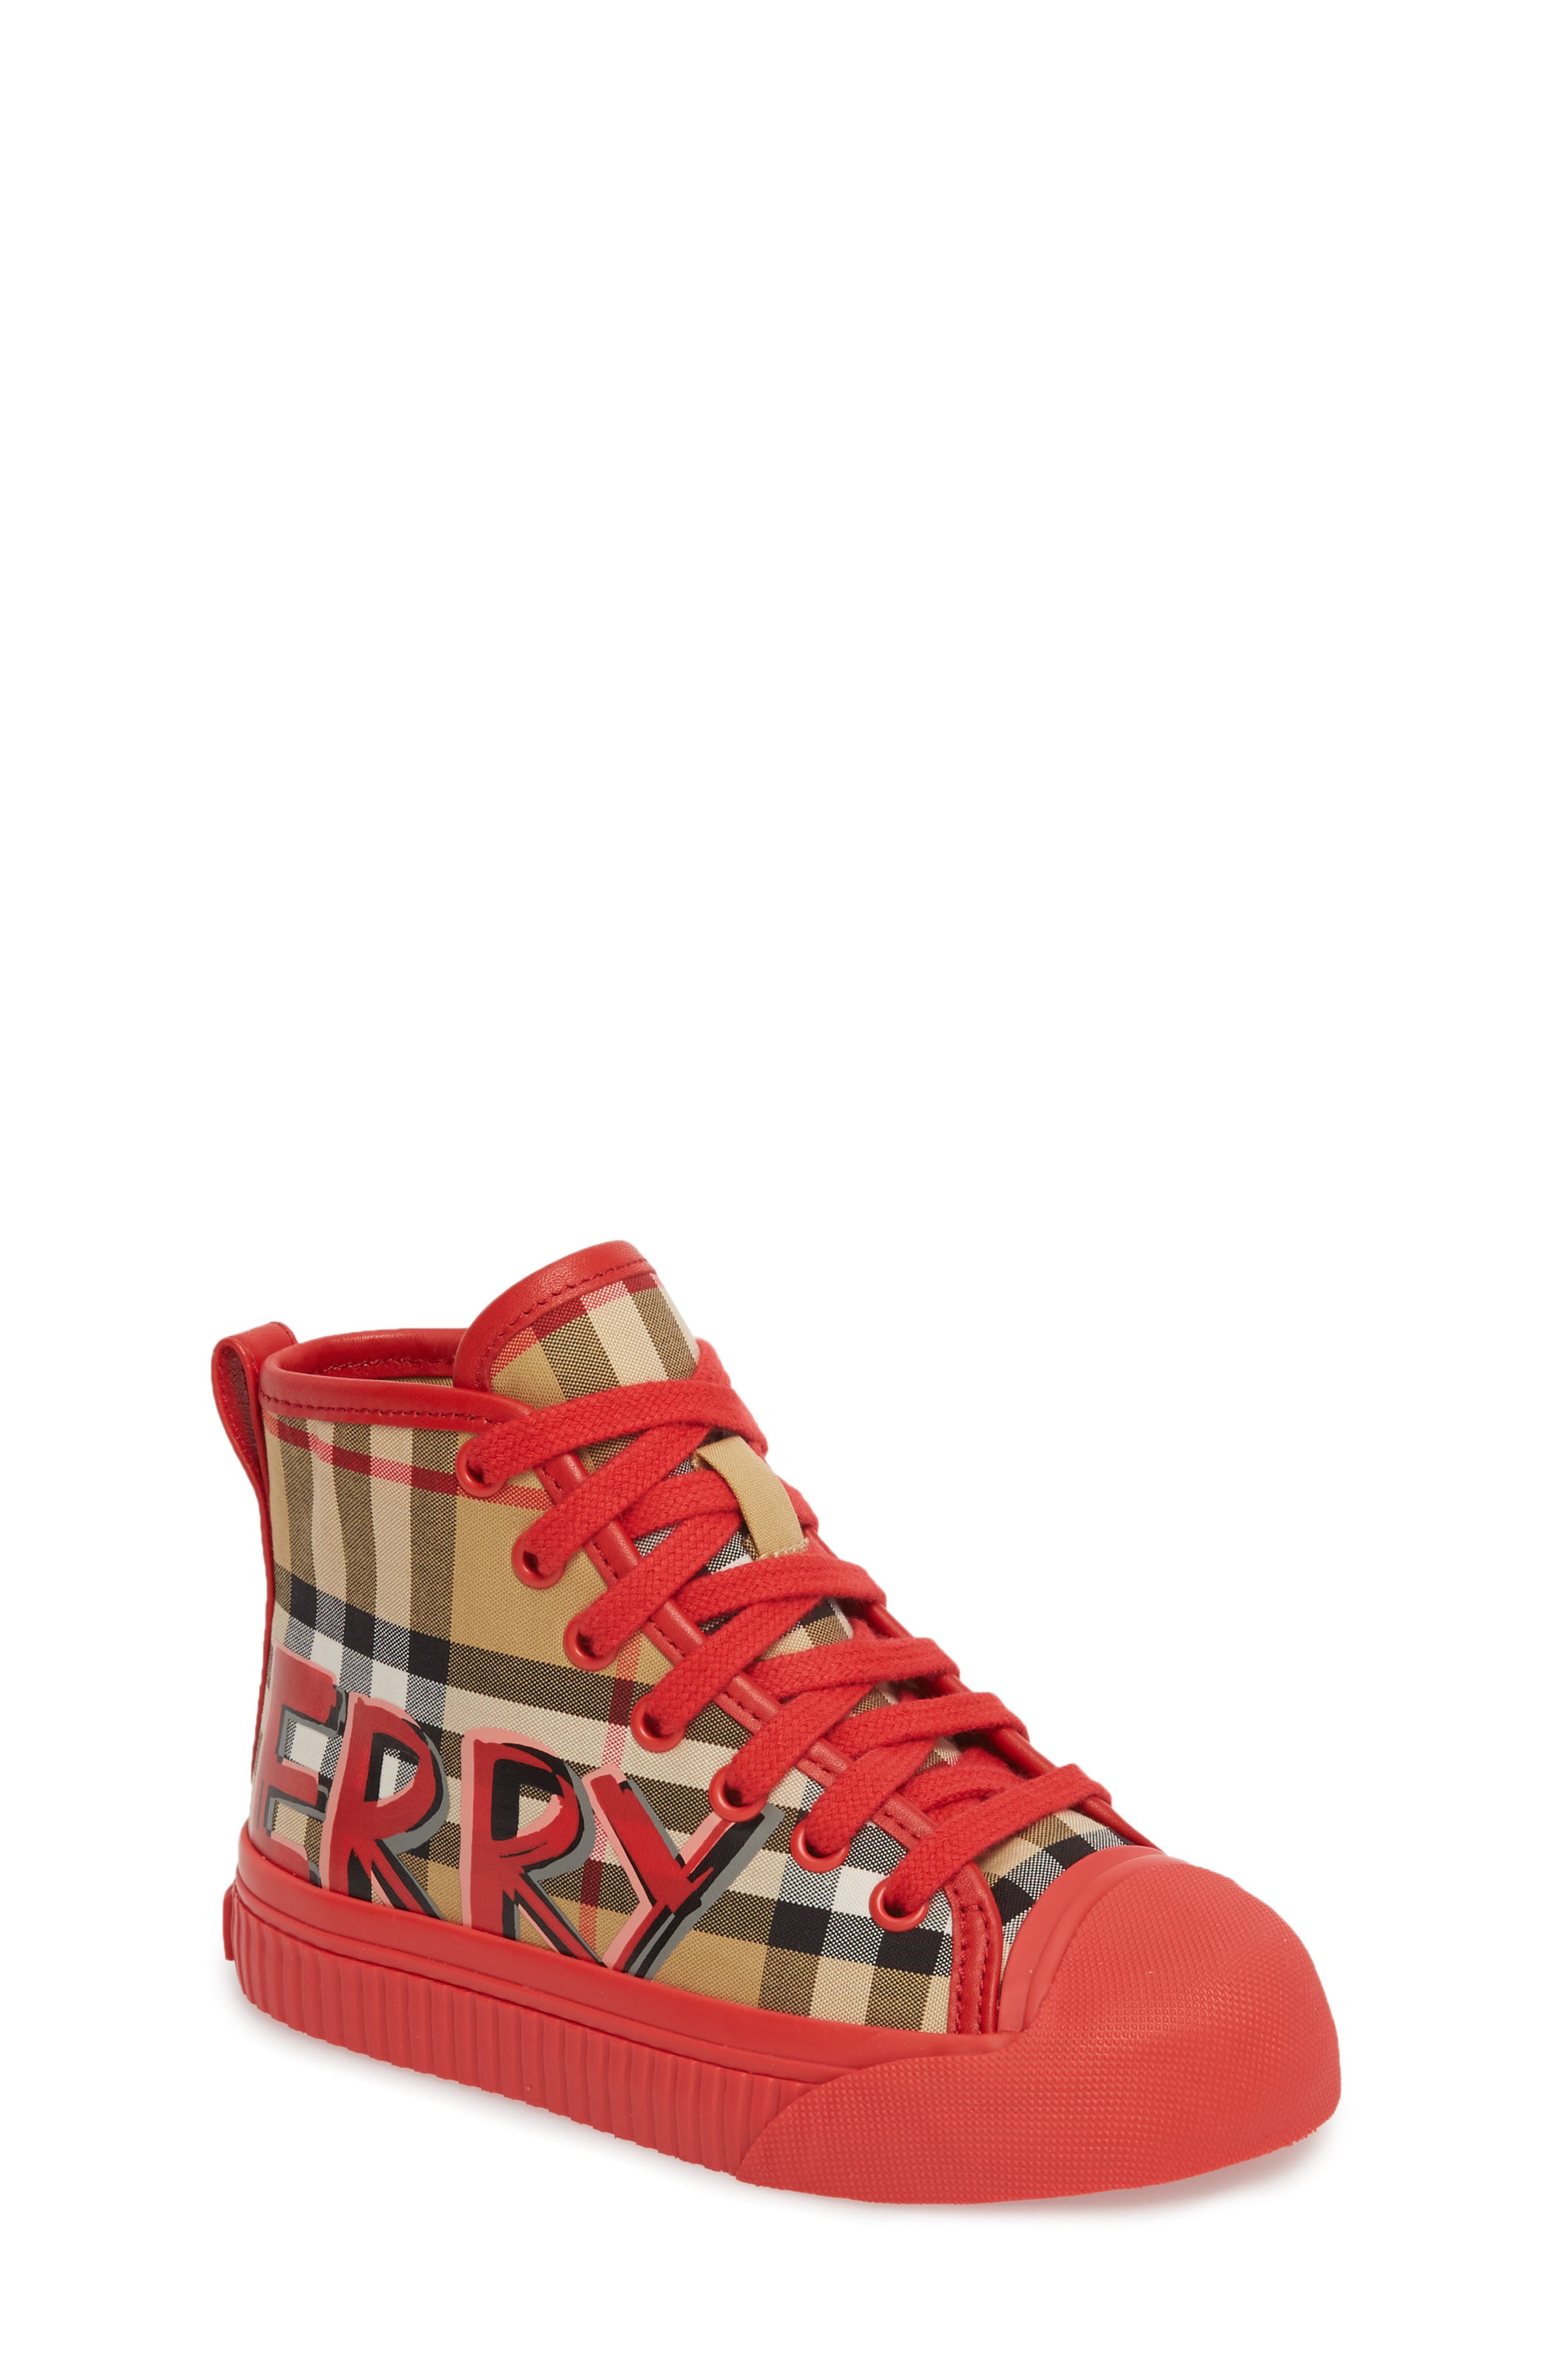 burberry red sneakers